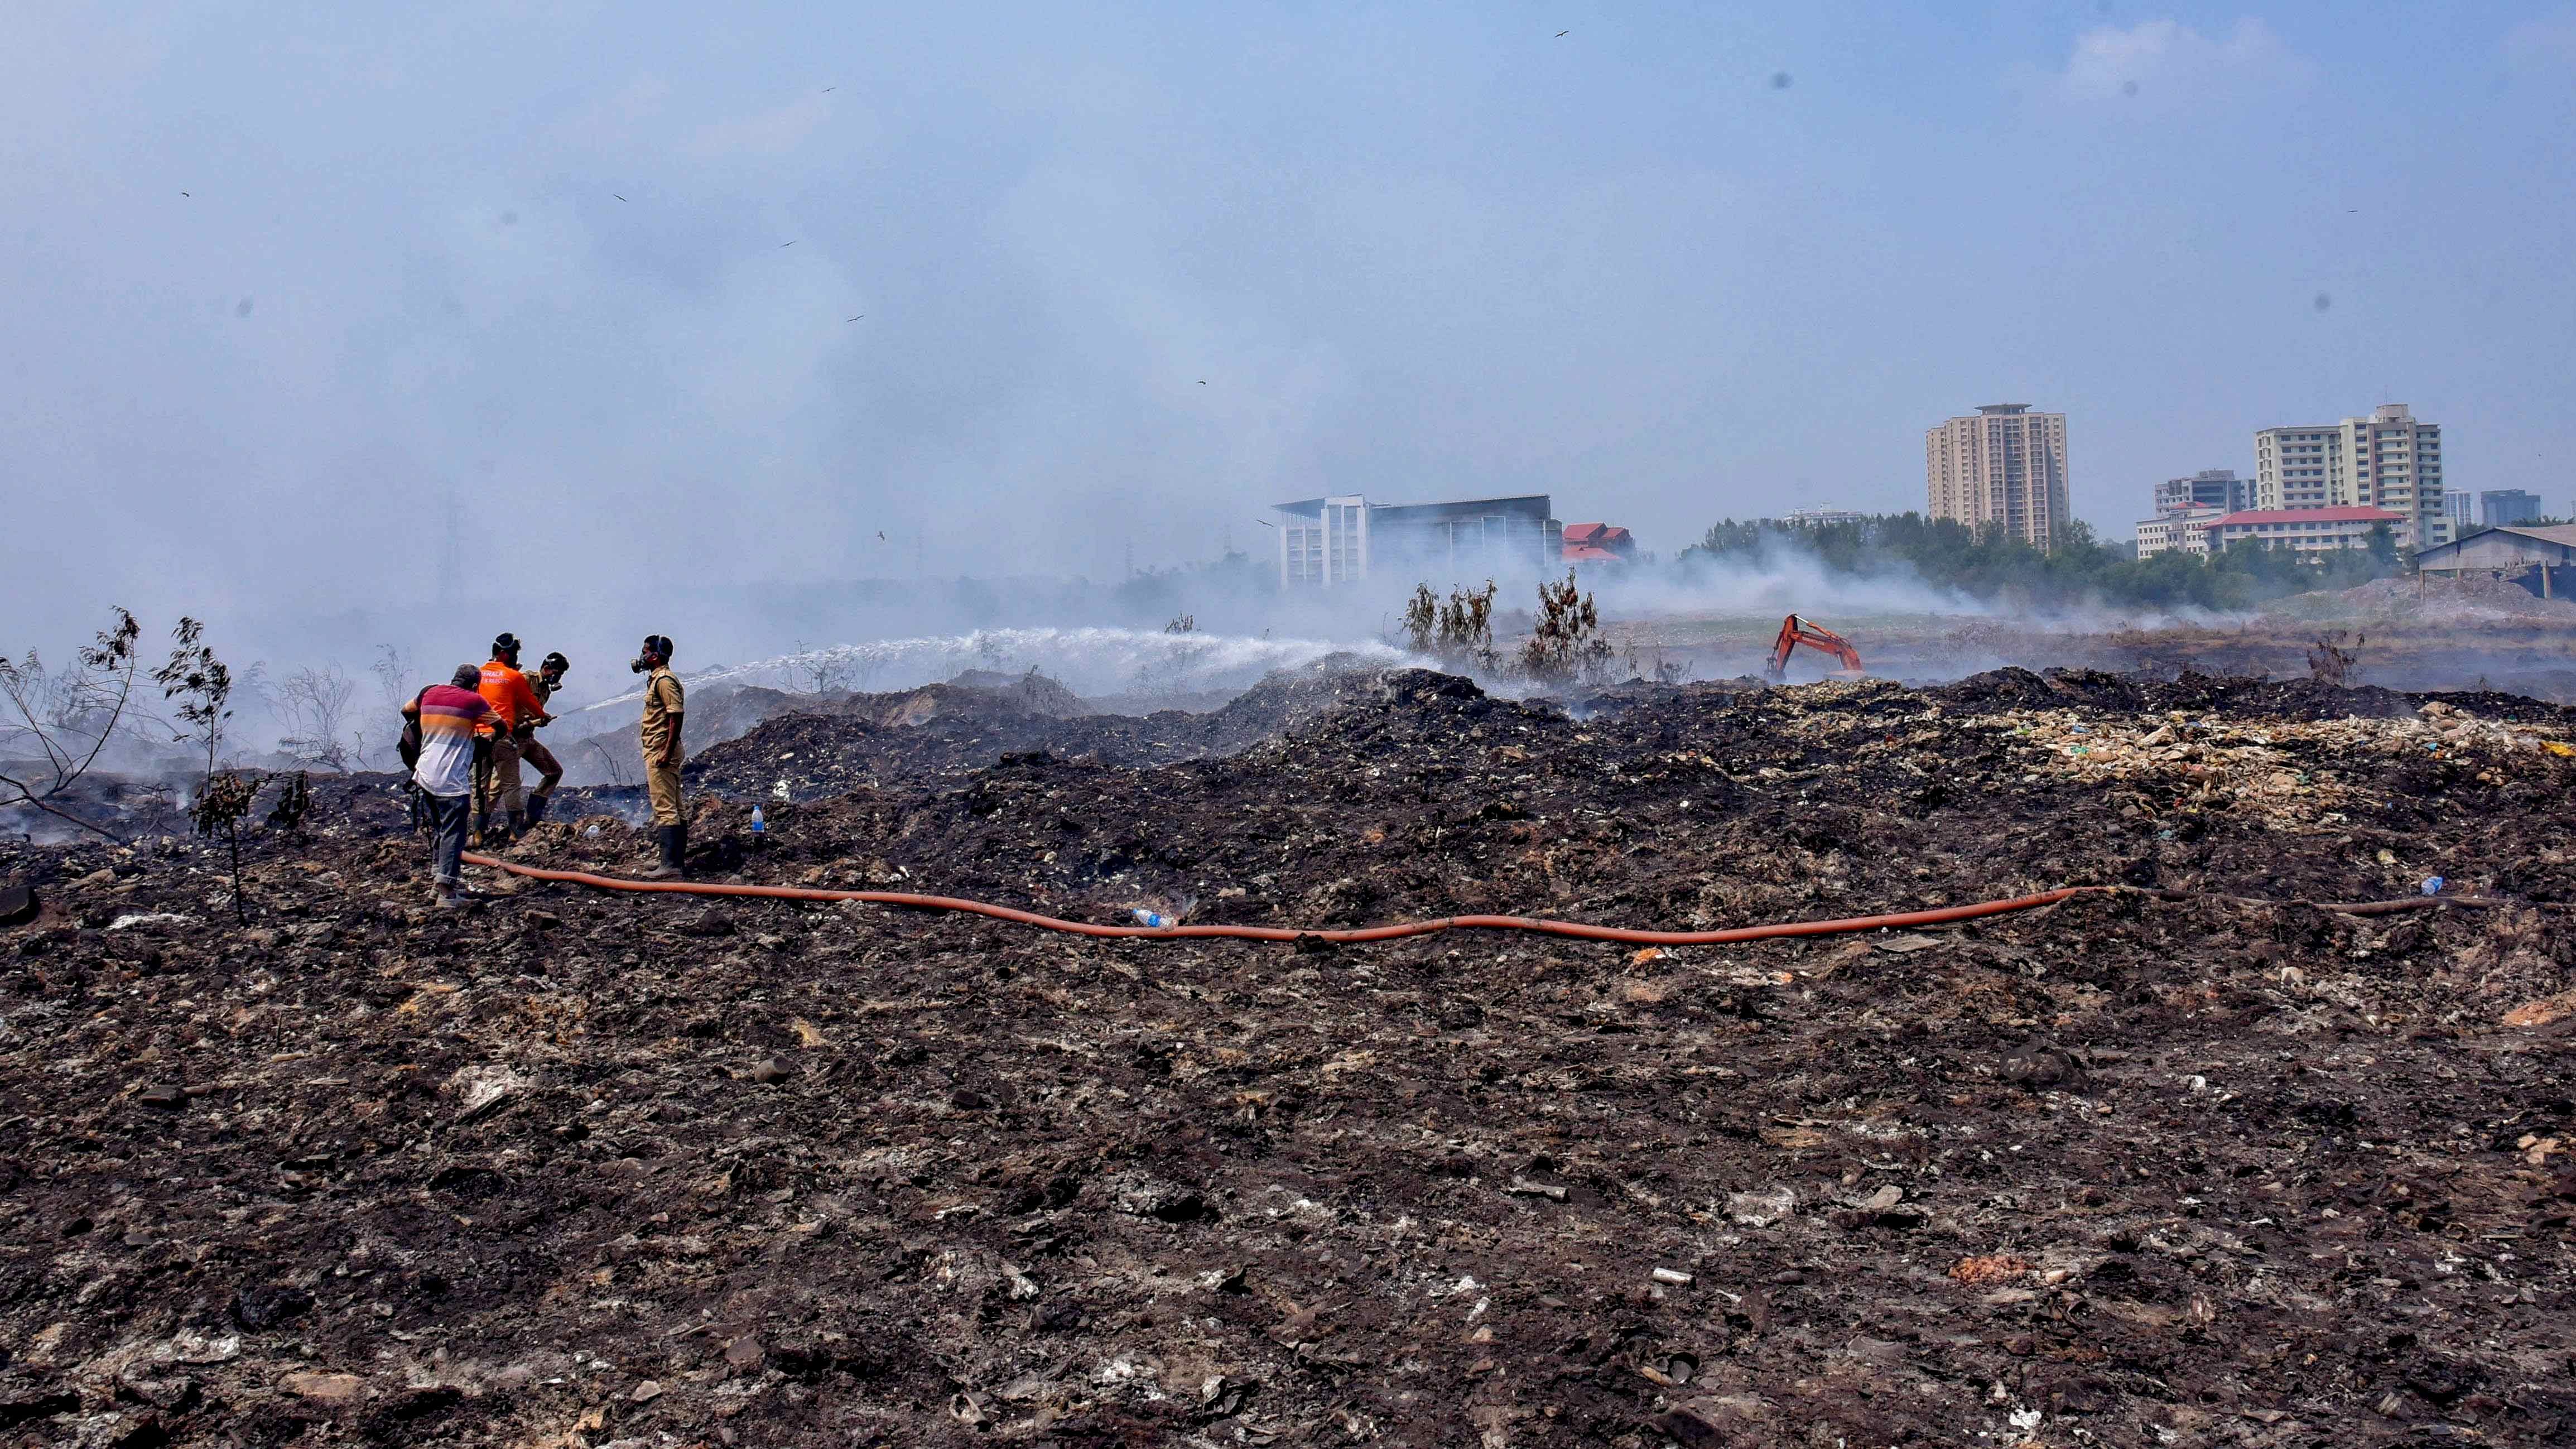 Fire and rescue personnel try to put out the fire which broke out at the Brahmapuram waste treatment plant. Credit: PTI Photo